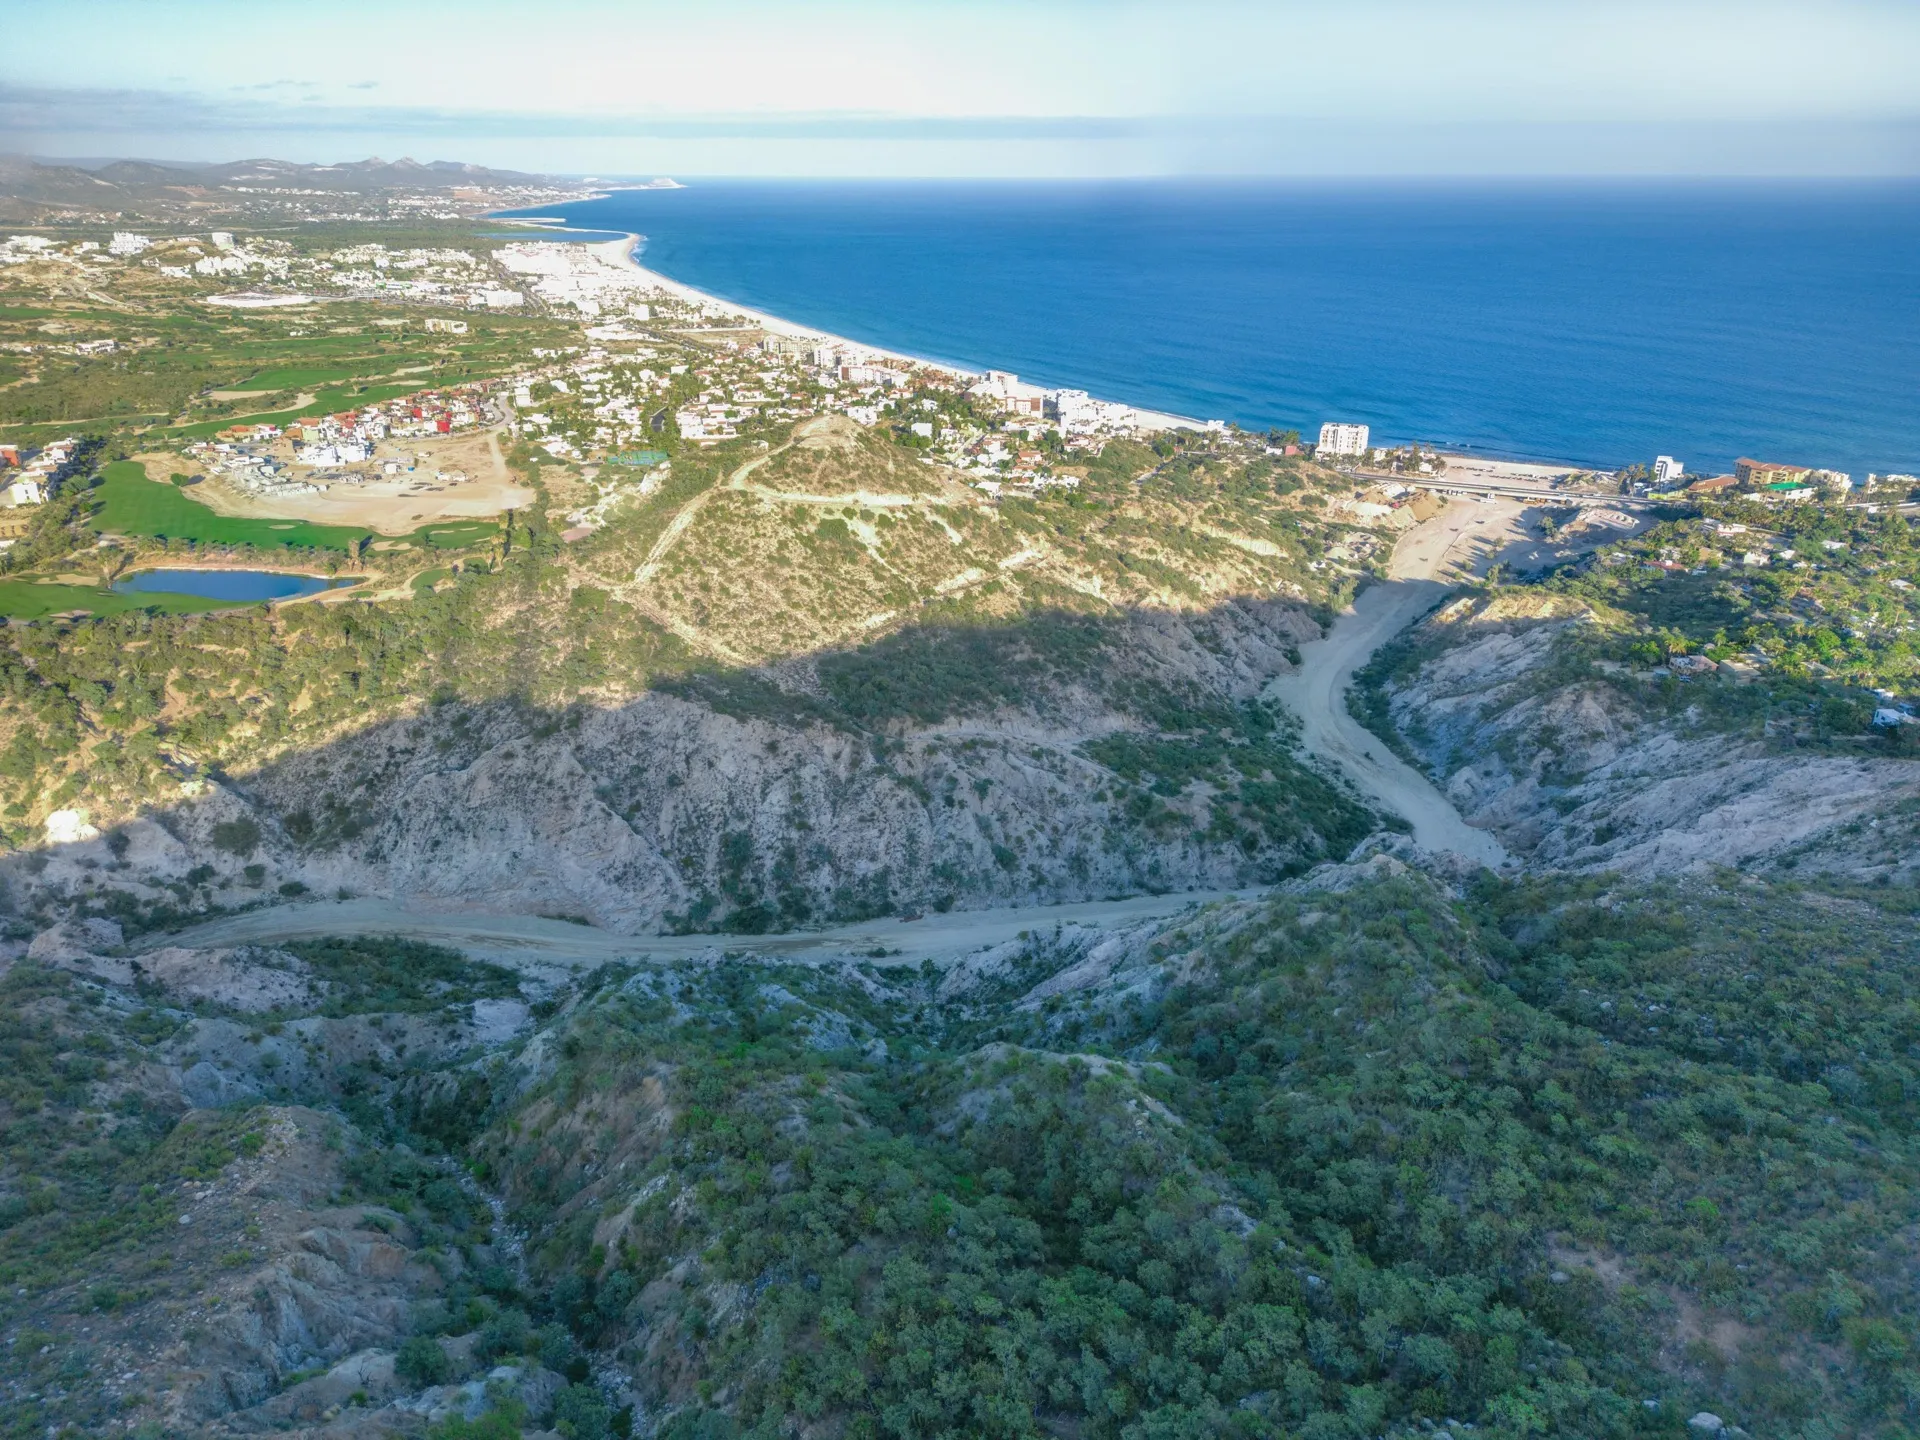 Undeniably one of the finest development parcels left in San Jose del Cabo, Montecito offers an elevated 55,414 square meters of jetliner views.